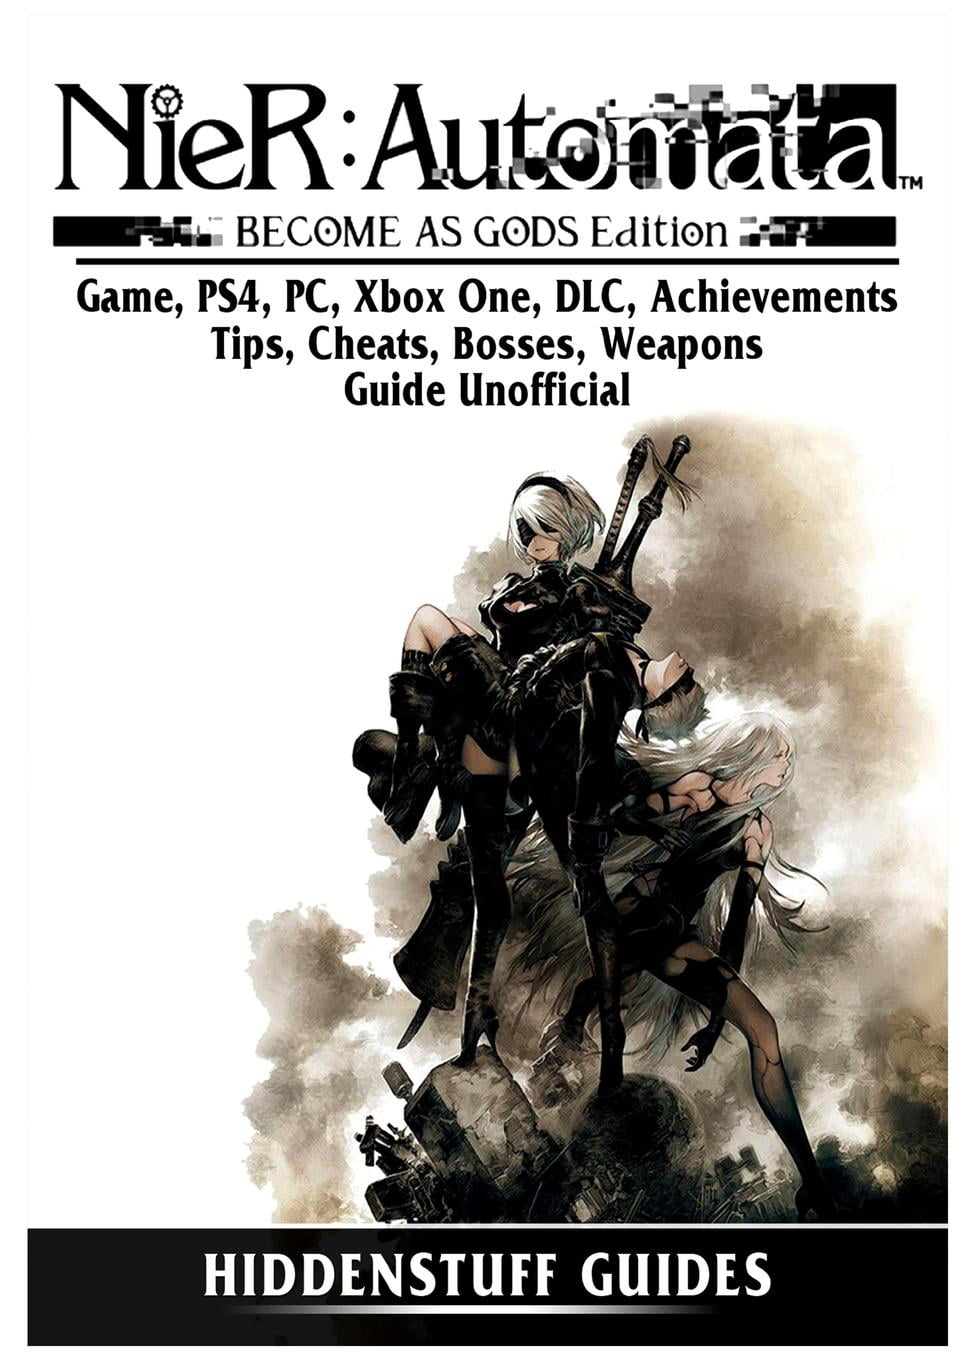 Controverse versieren Verlichting Nier Automata Become as Gods Game, Ps4, Pc, Xbox One, DLC, Achievements,  Tips, Cheats, Bosses, Weapons, Guide Unofficial (Paperback) - Walmart.com